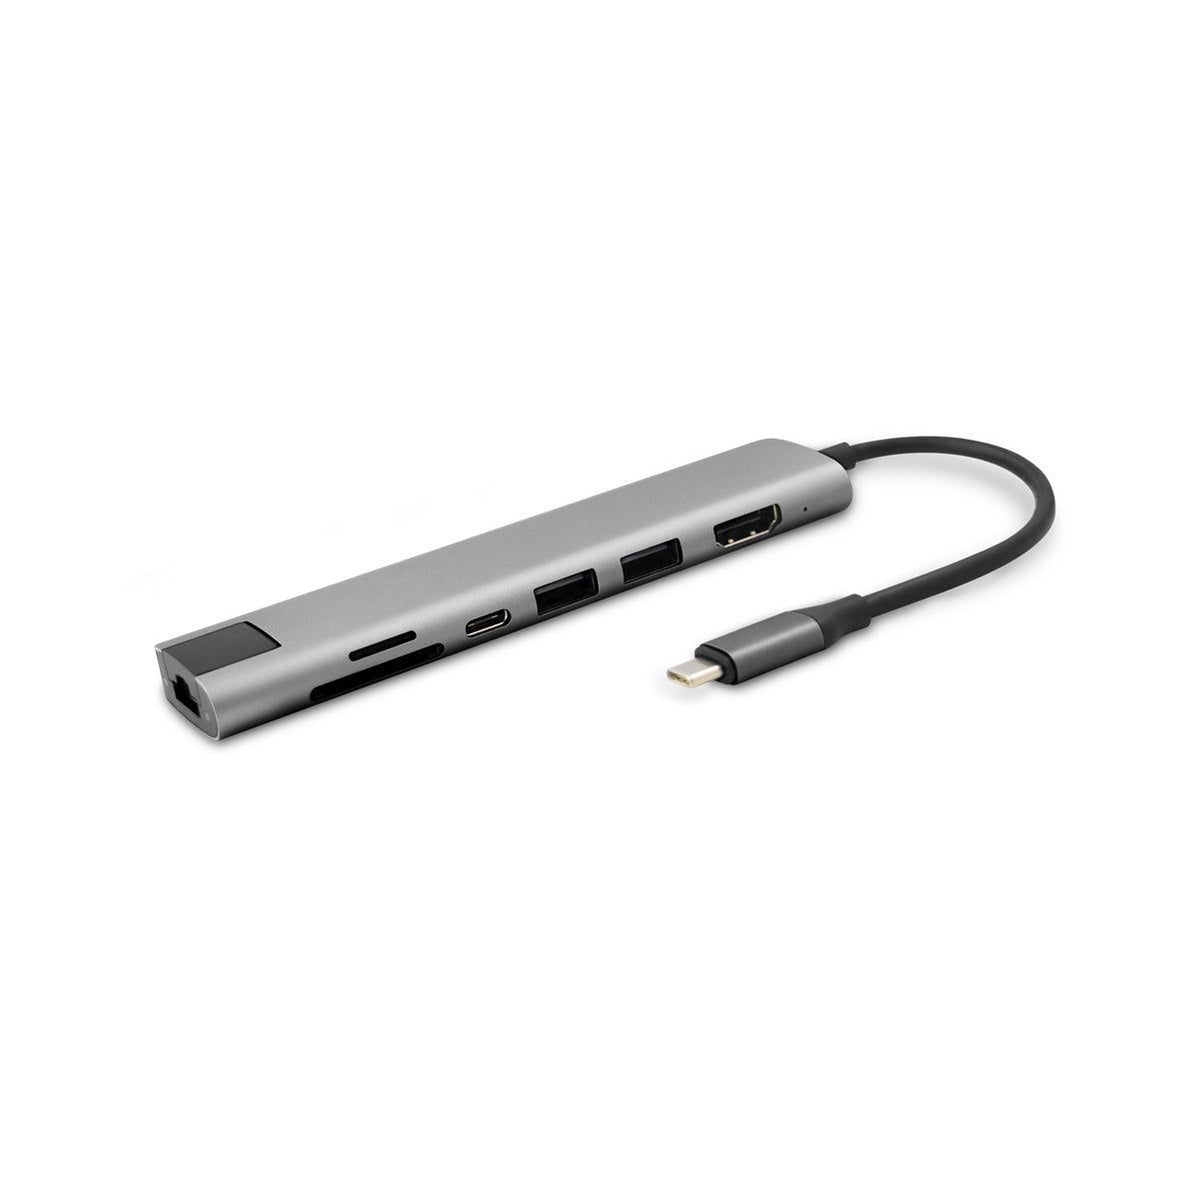 Epico Multimedia 3 (2020) USB-C Multiport Hub - Space Gray | 9915112100040 from Epico - DID Electrical